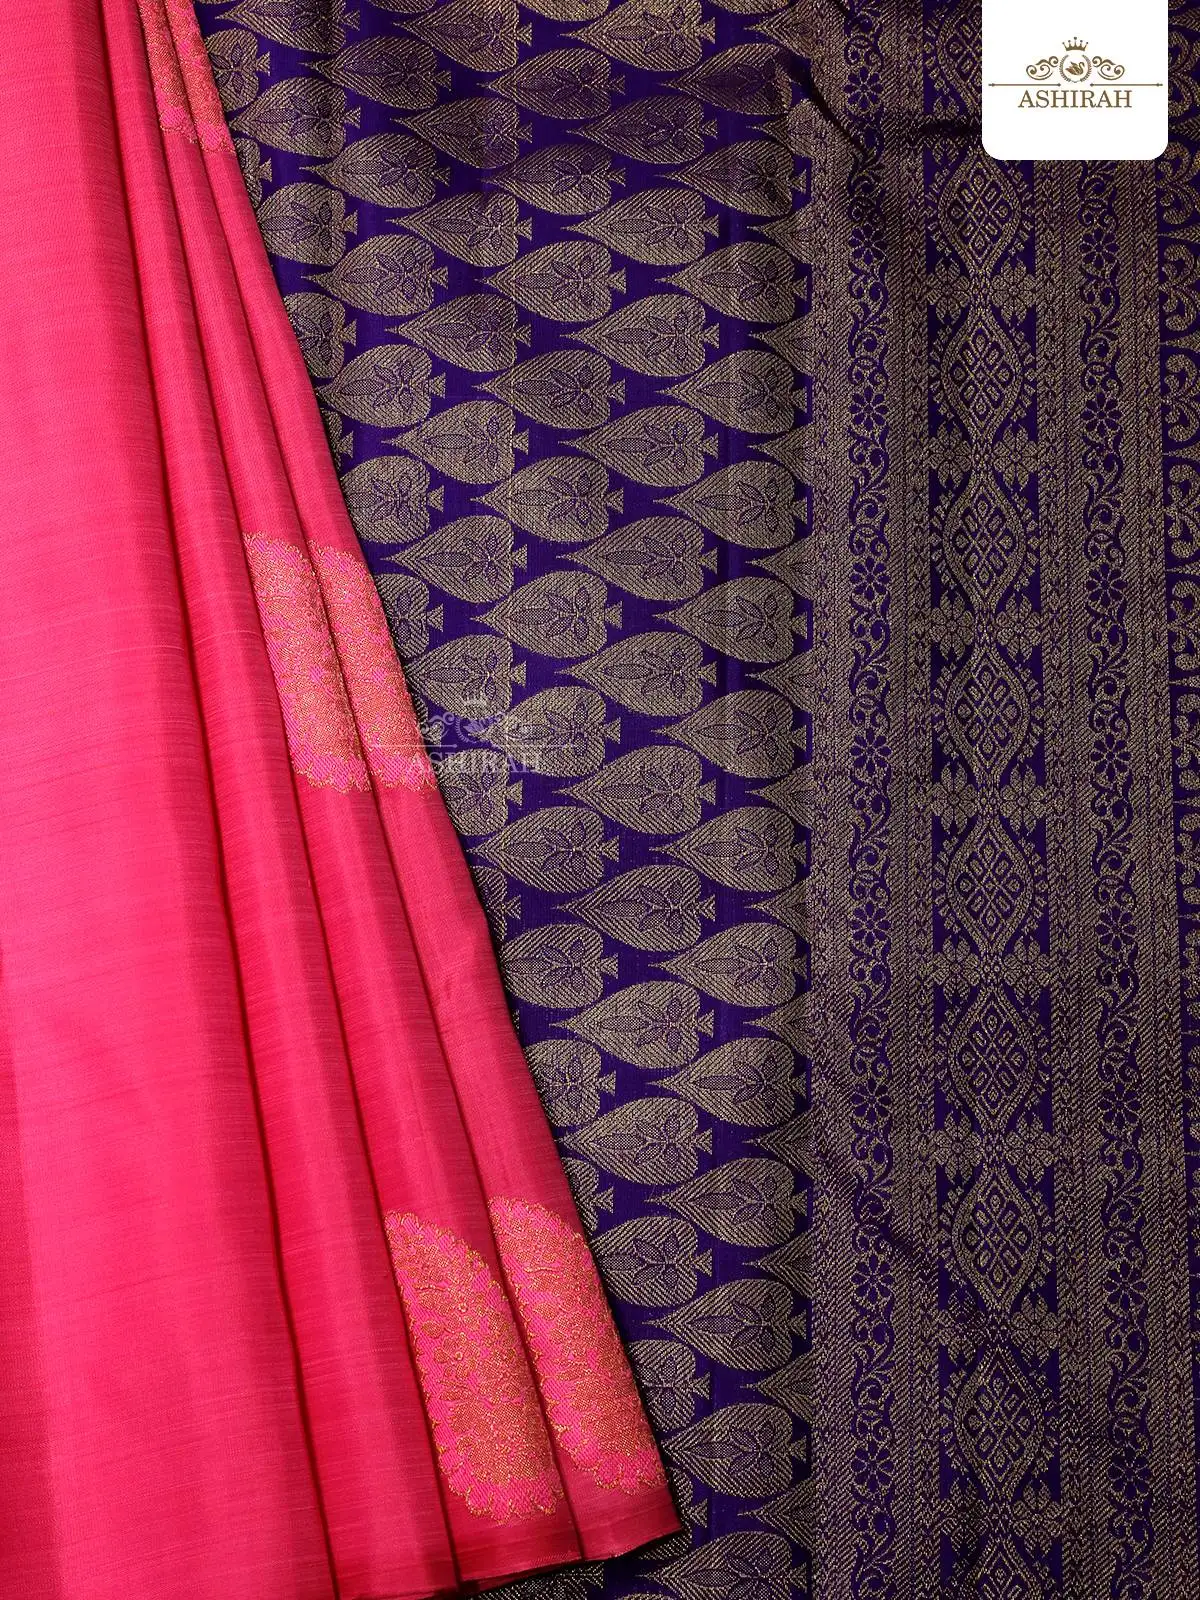 Pink Pure Kanchipuram Silk Saree With Paisley Motifs On The Body And Without Border